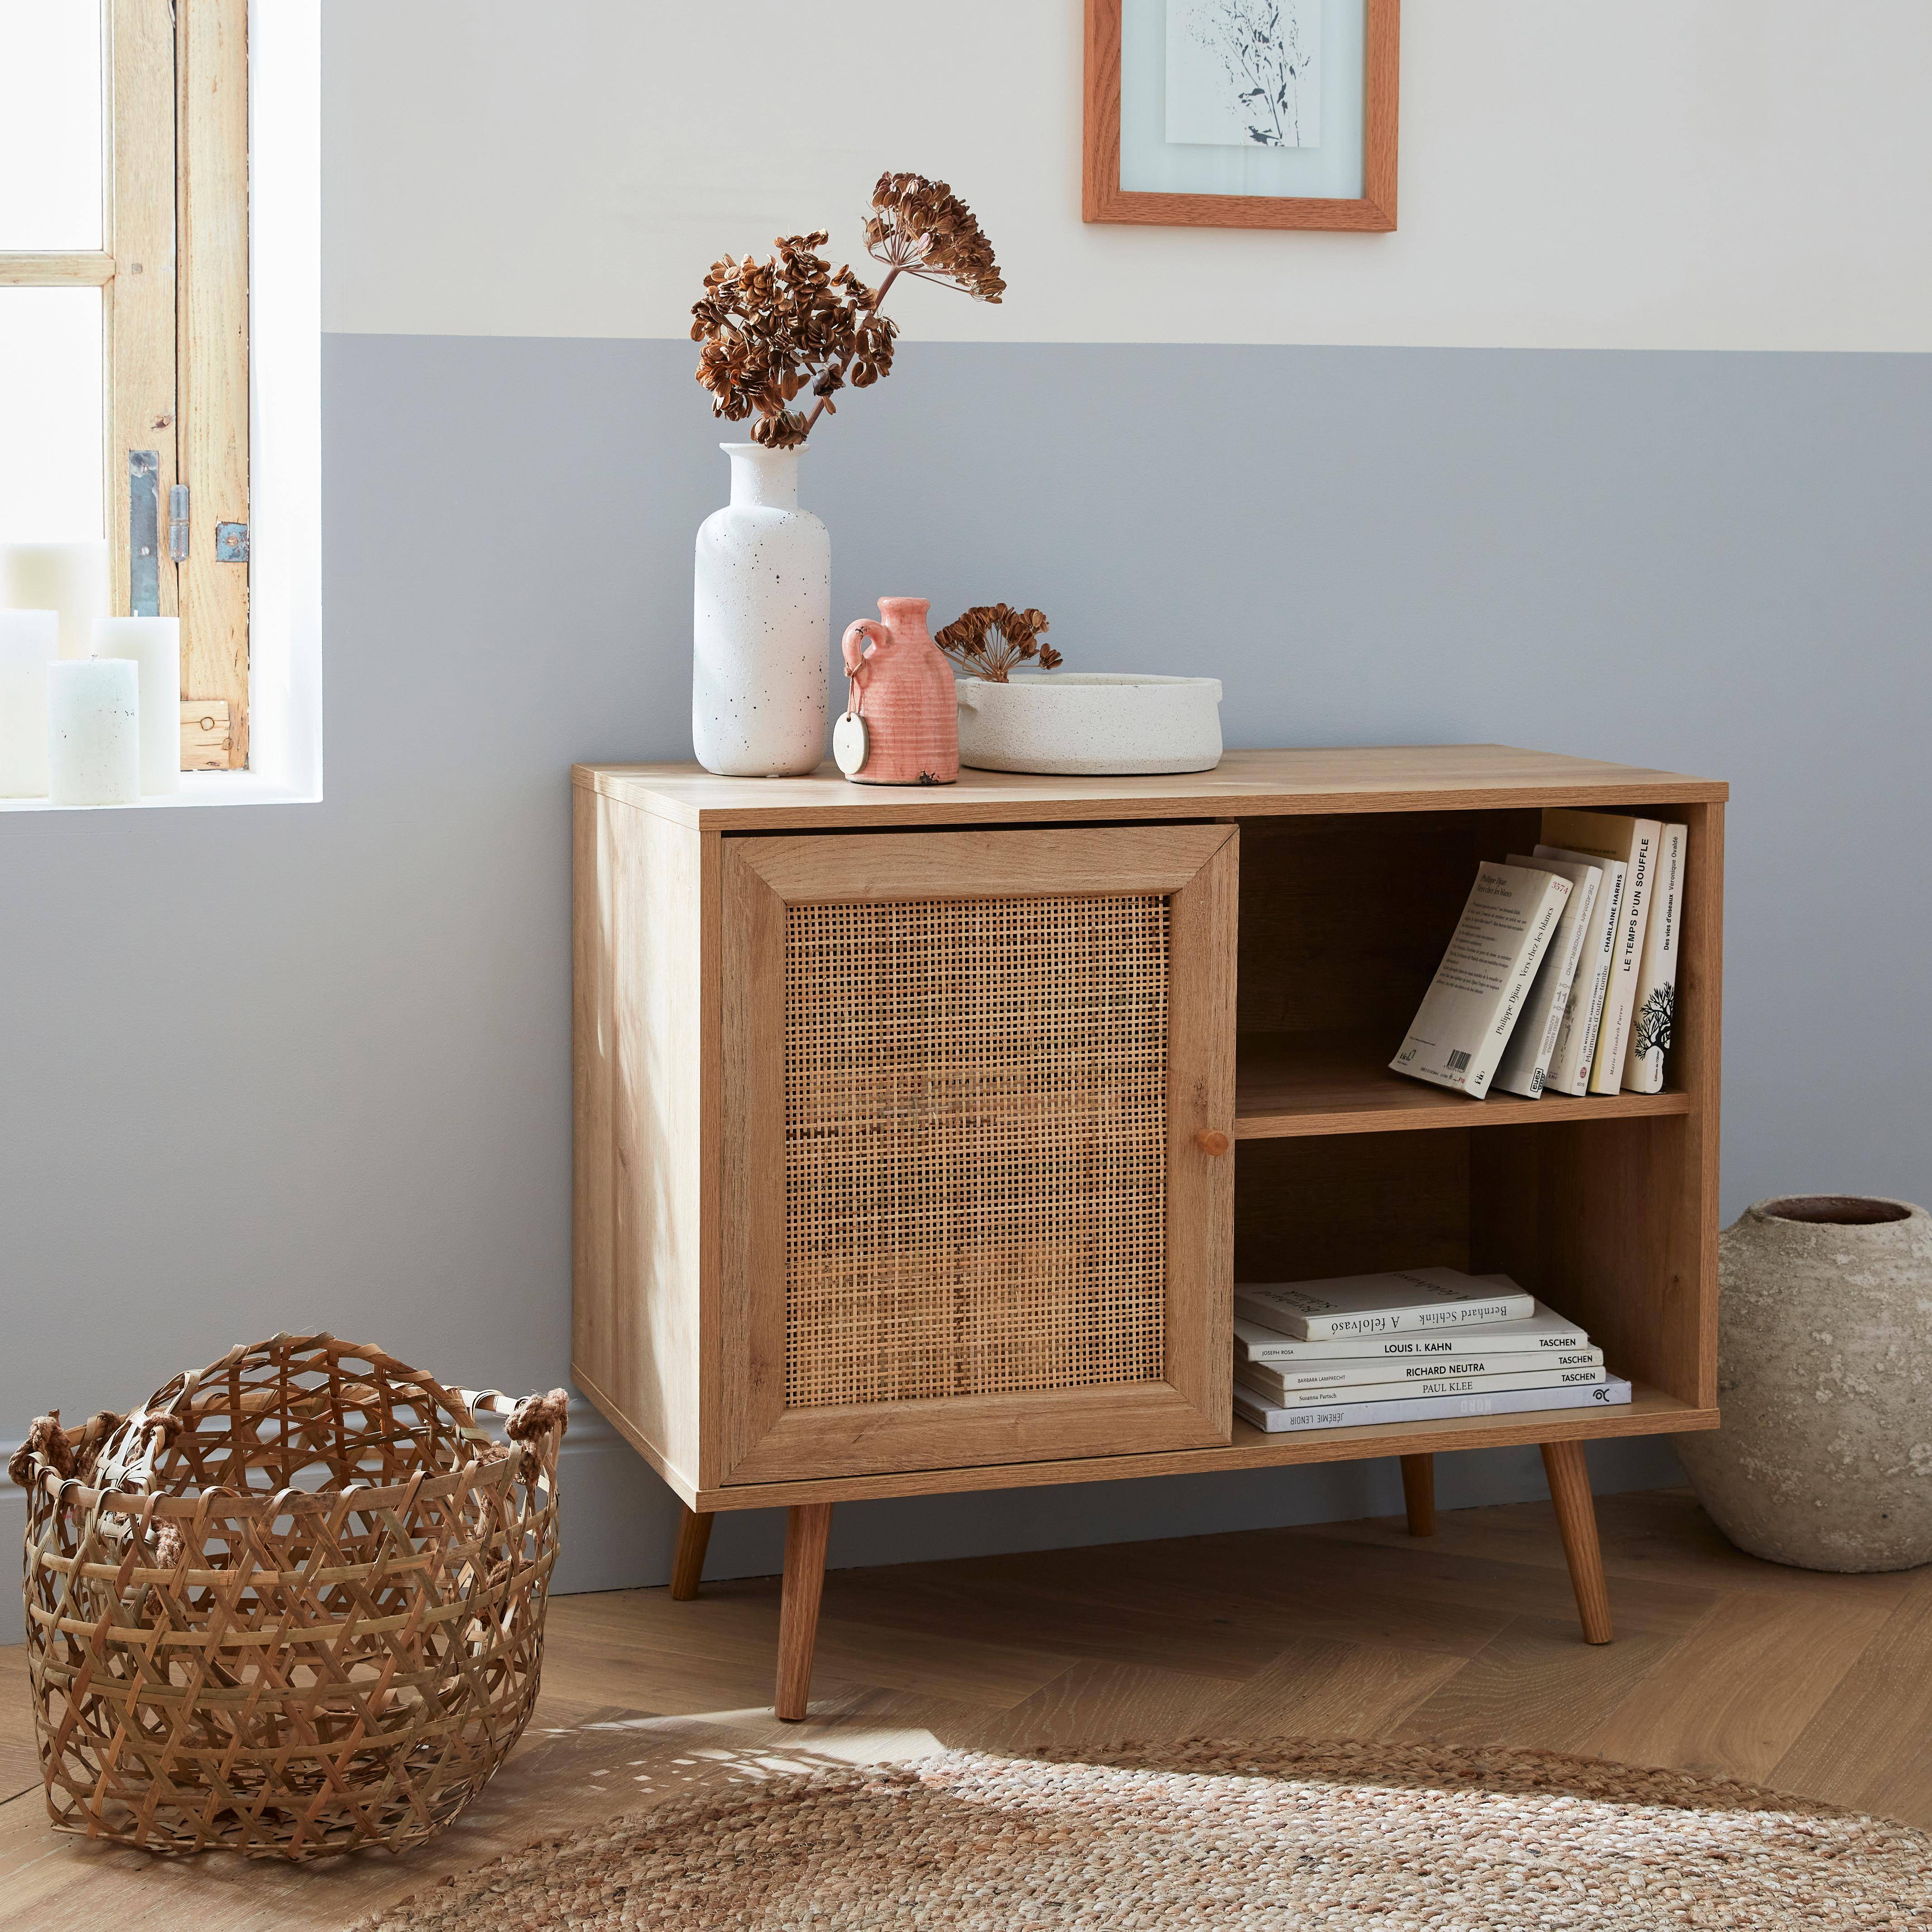 Wooden and cane rattan detail storage cabinet with 2 shelves, 1 cupboard, Scandi-style legs, 80x39x65.8cm - Boheme - Natural wood colour Photo1